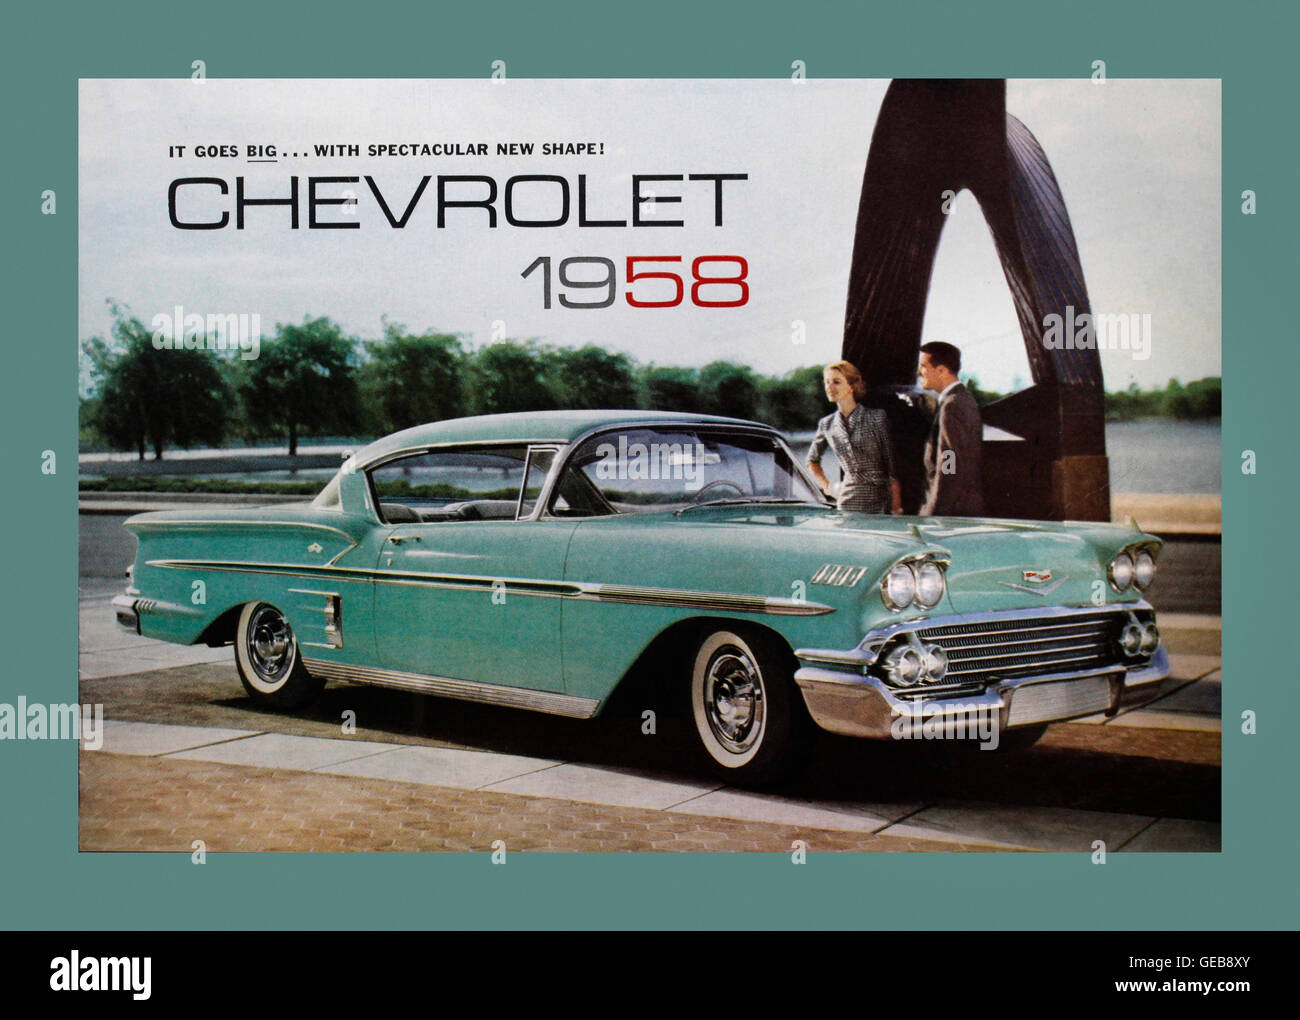 CHEVROLET 1958 poster campaign ad for Chevrolet Bel Air Impala Stock Photo